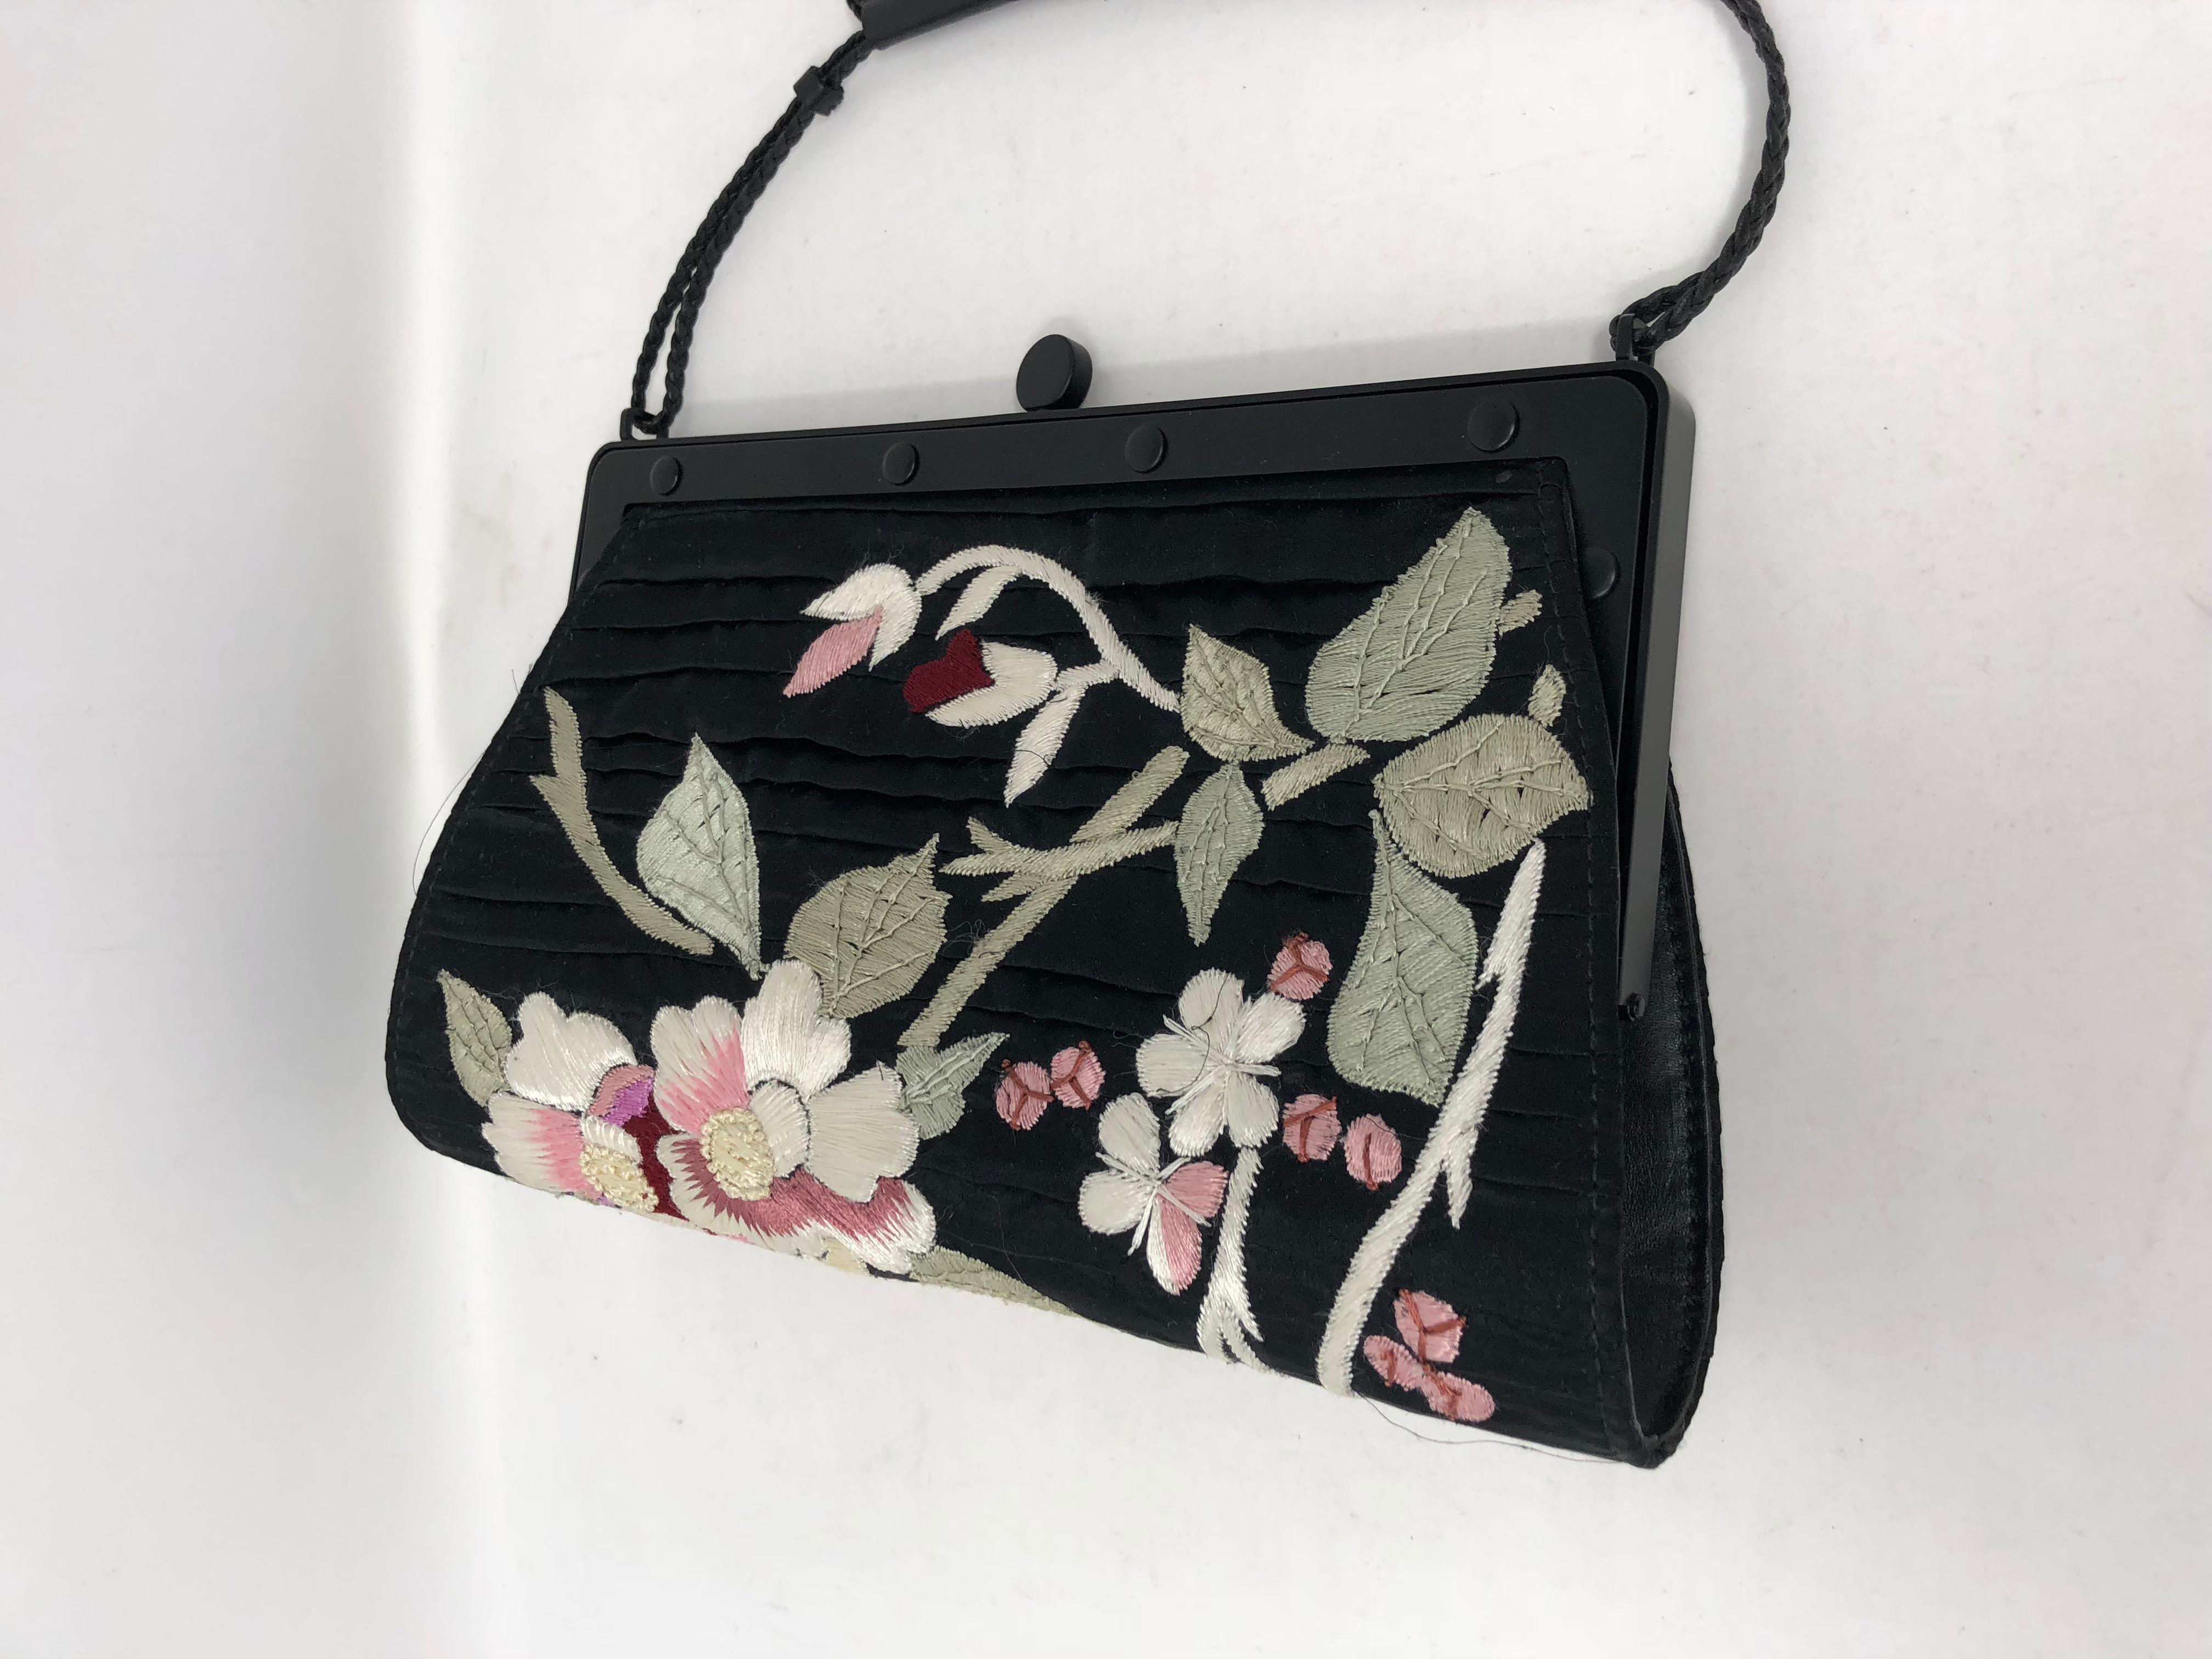 Gucci embroidered Evening Bag 3